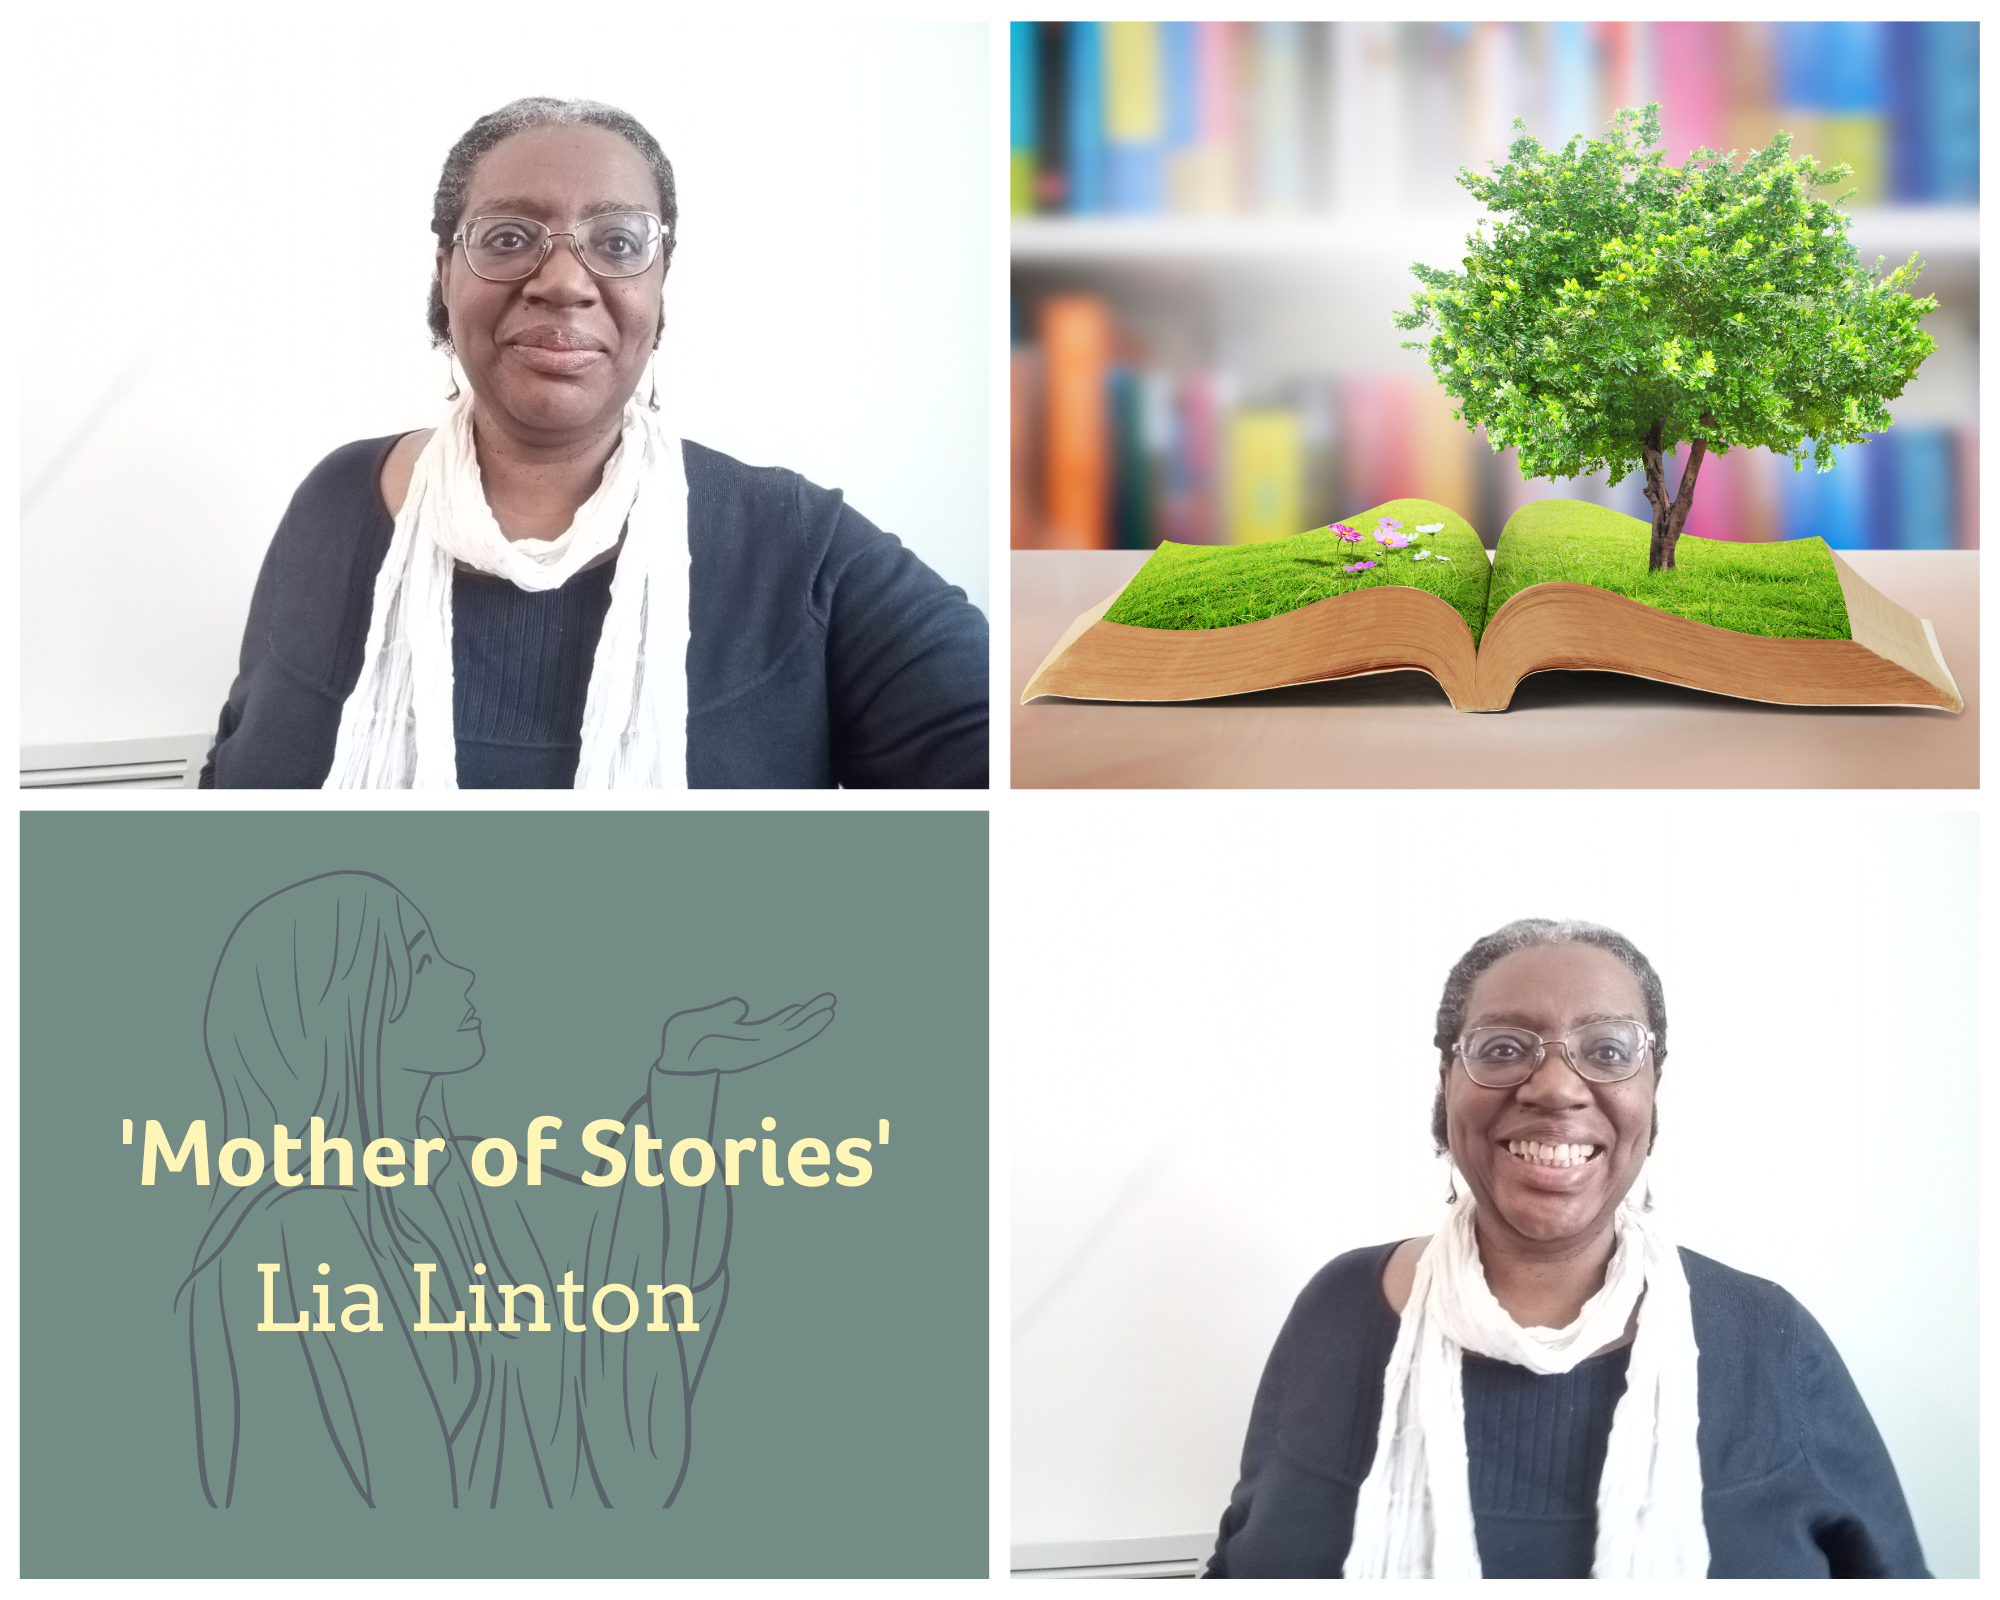 Lia Linton, Mother of Stories